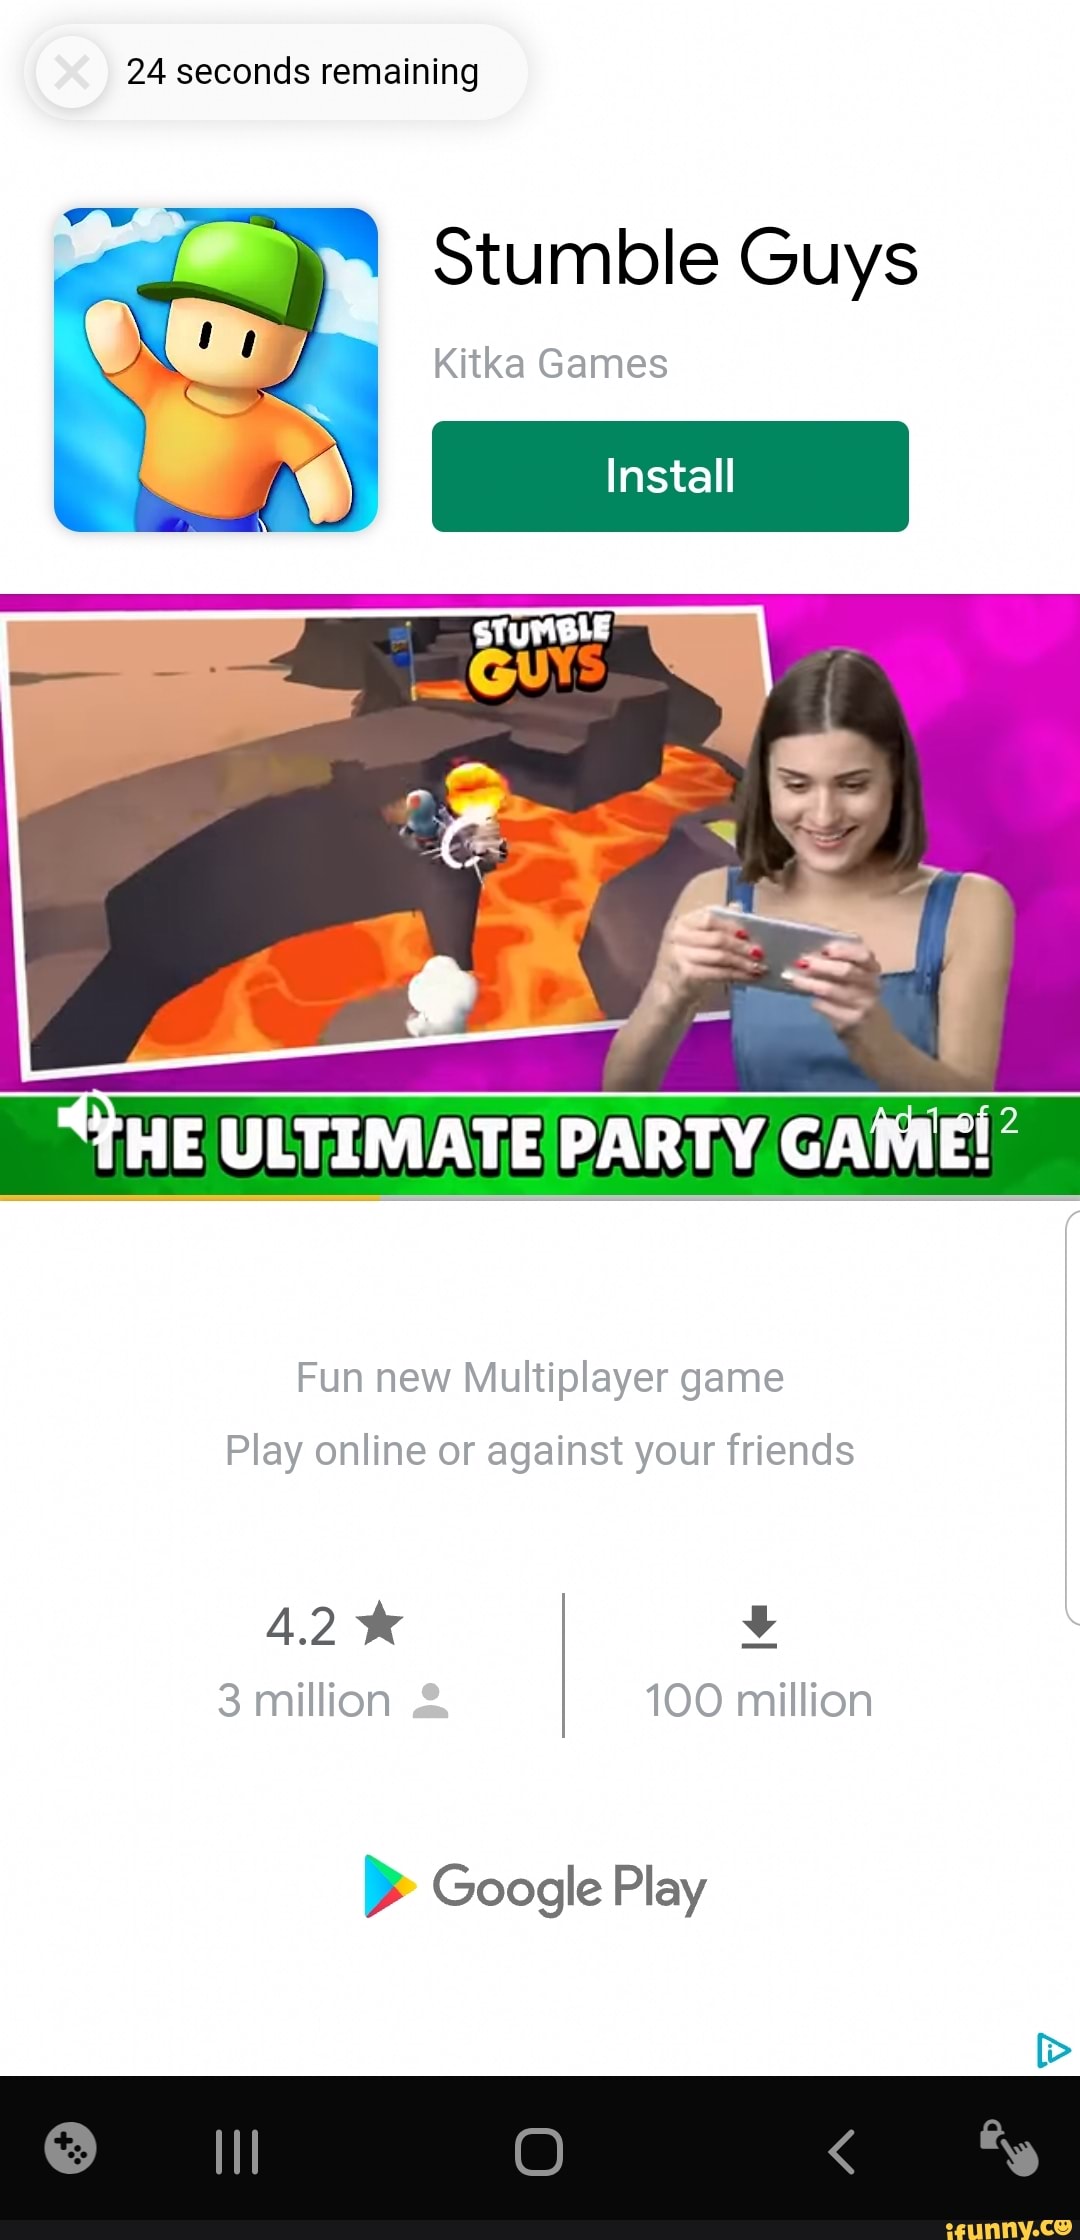 24 seconds remaining Stumble Guys Kitka Games Install HE ULTIMATE PARTY GAME!  Fun new Multiplayer game Play online or against your friends 42* le 3  million 100 million Google Play - iFunny